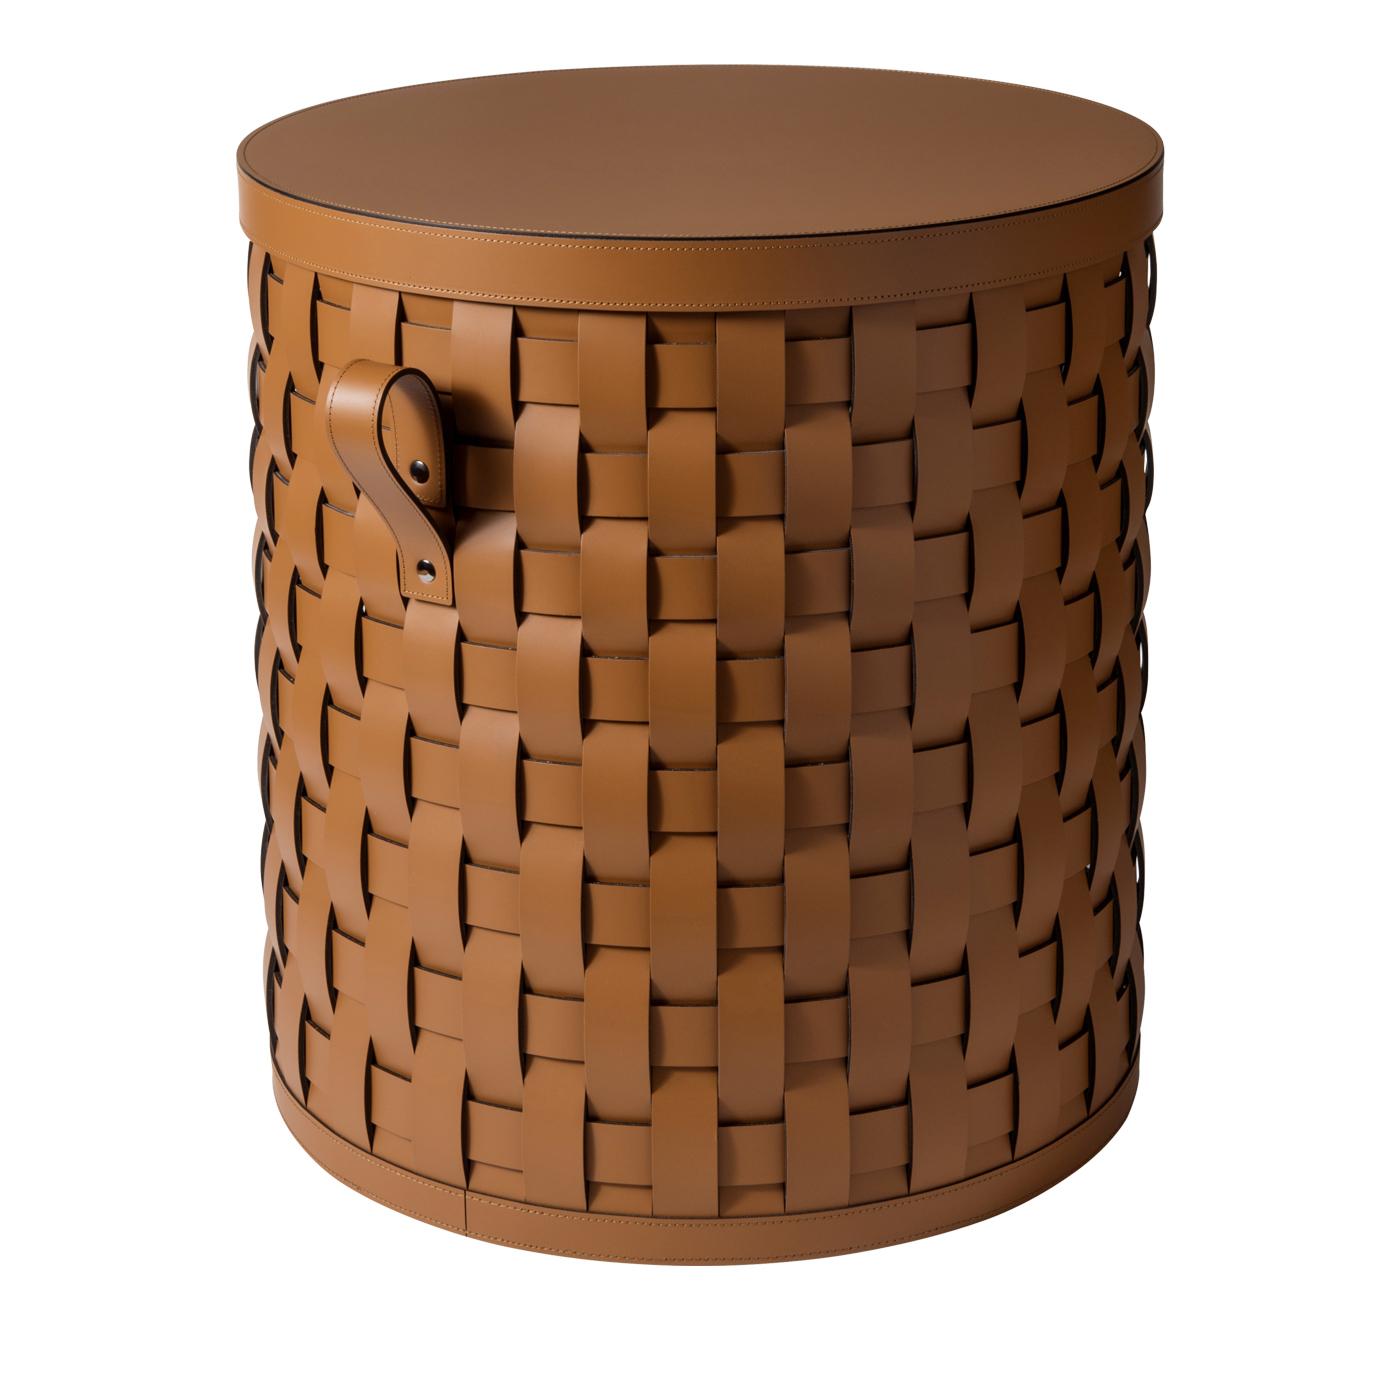 Handcrafted from eco-friendly leather in a woven weave finish, this exquisite basket is the ideal solution to keep any area organized. Part of the Demetra series, this small basket, which features a lid to promote a clutter free space, is made of